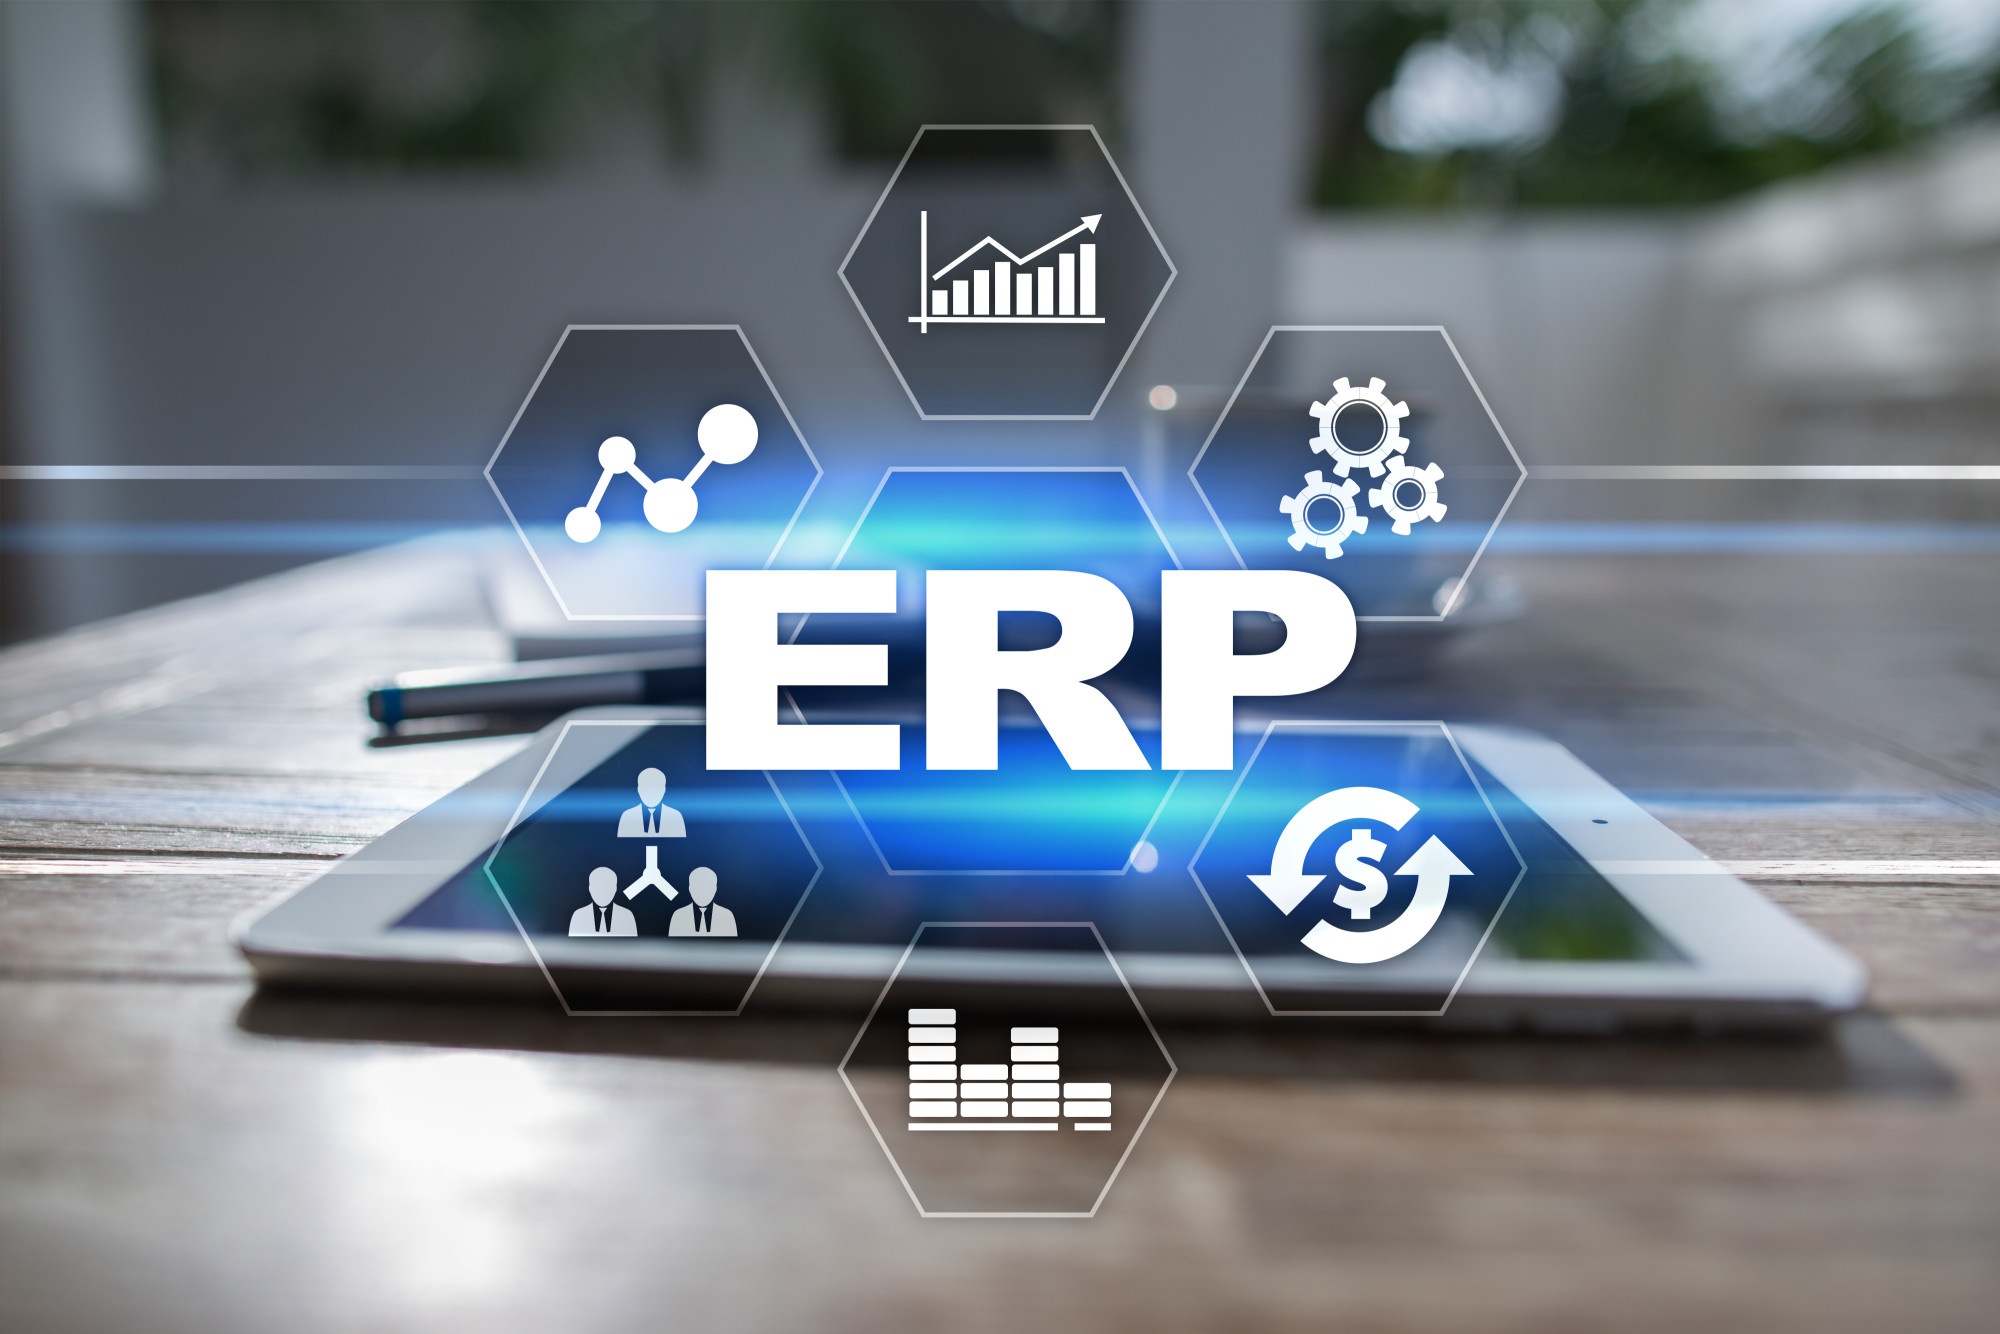 Epicor® ERP Software for Manufacturing Best ERP for